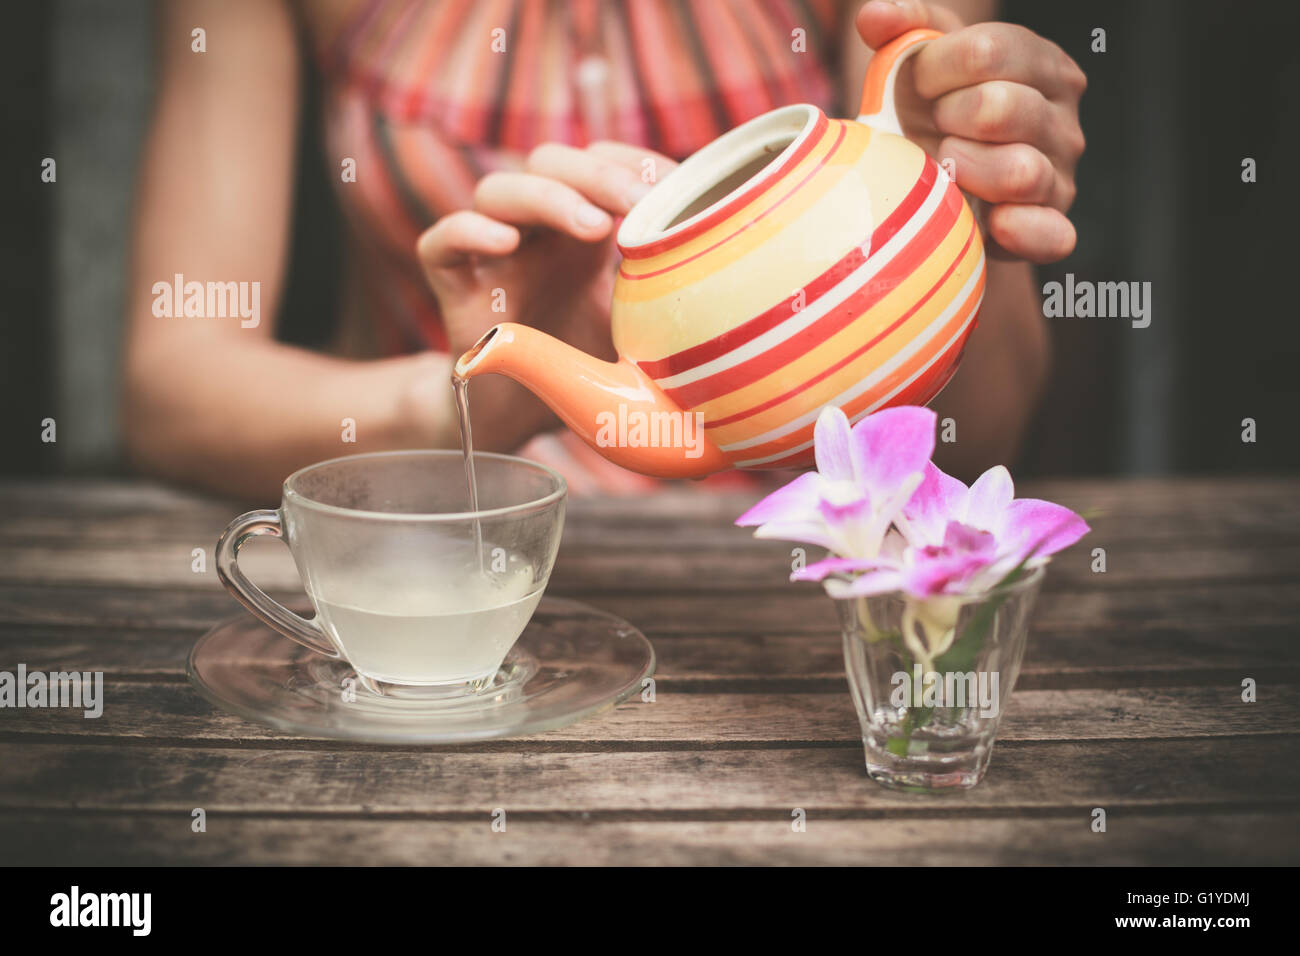 A young woman is sitting at a table and is pouring a cup of tea Stock Photo